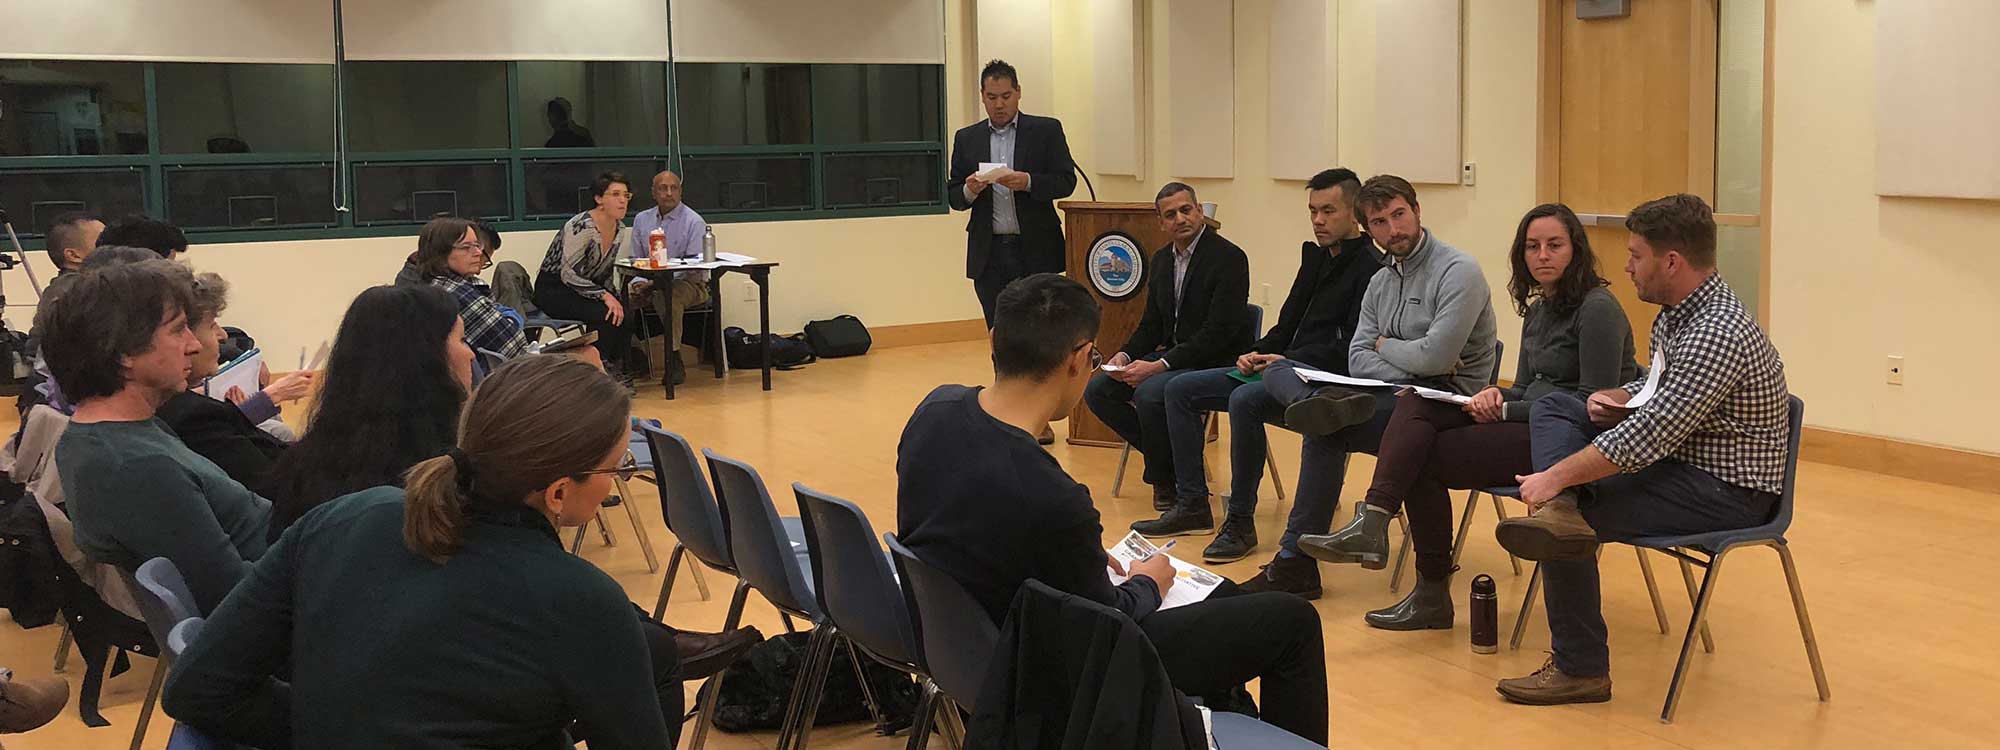 A panel of local planning experts meet to discuss the future of El Camino Real, hosted by the Santa Clara Community Advocates